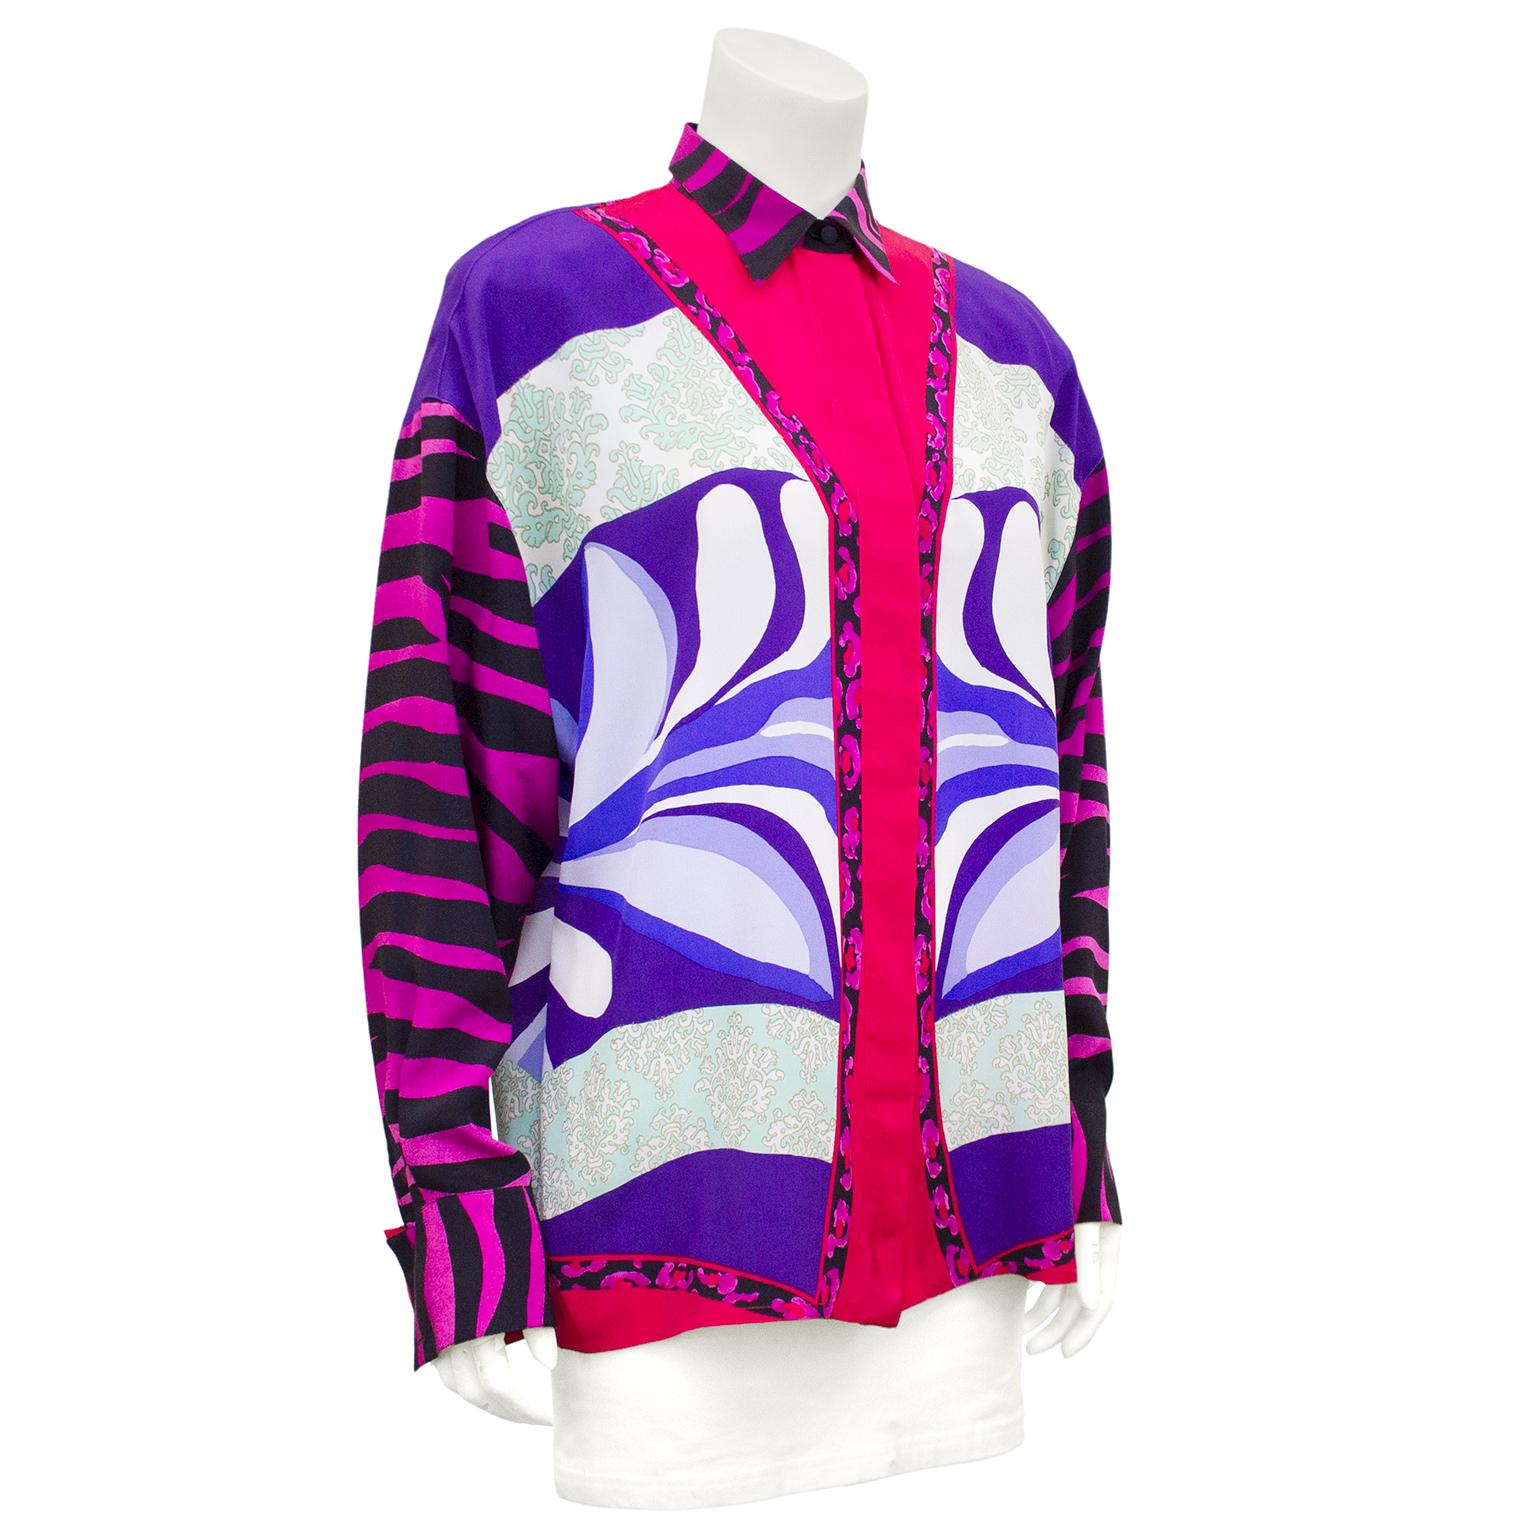 Bold mixed print and colour block Gianni Versace silk shirt from the early 1990s. Hot pink and black zebra print sleeves and collar with French cuffs. Body features thick vertical stripes of solid purple, white and mint green damask print and an